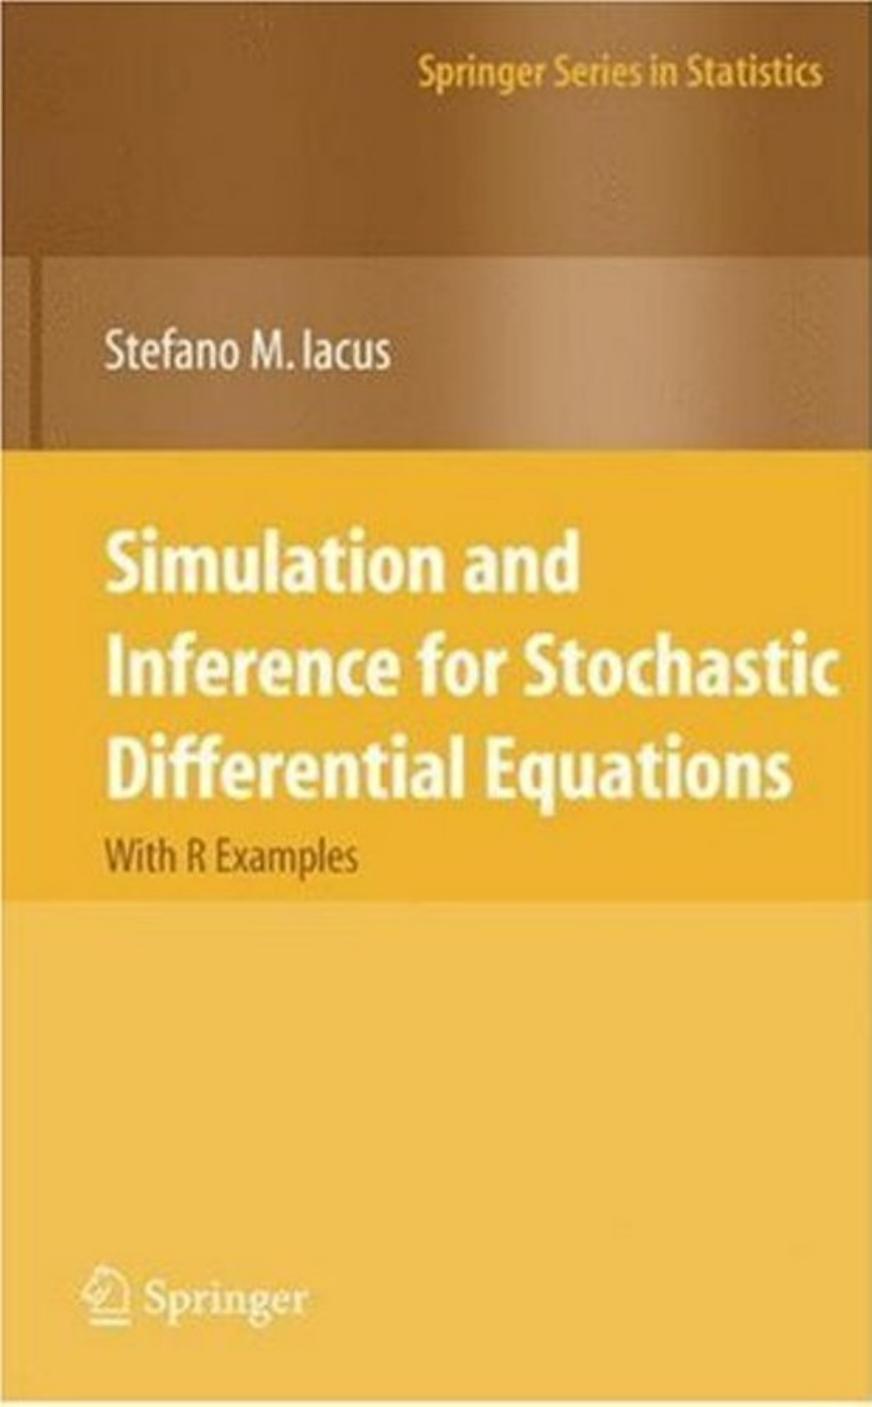 Simulation and inference for stochastic differential equations